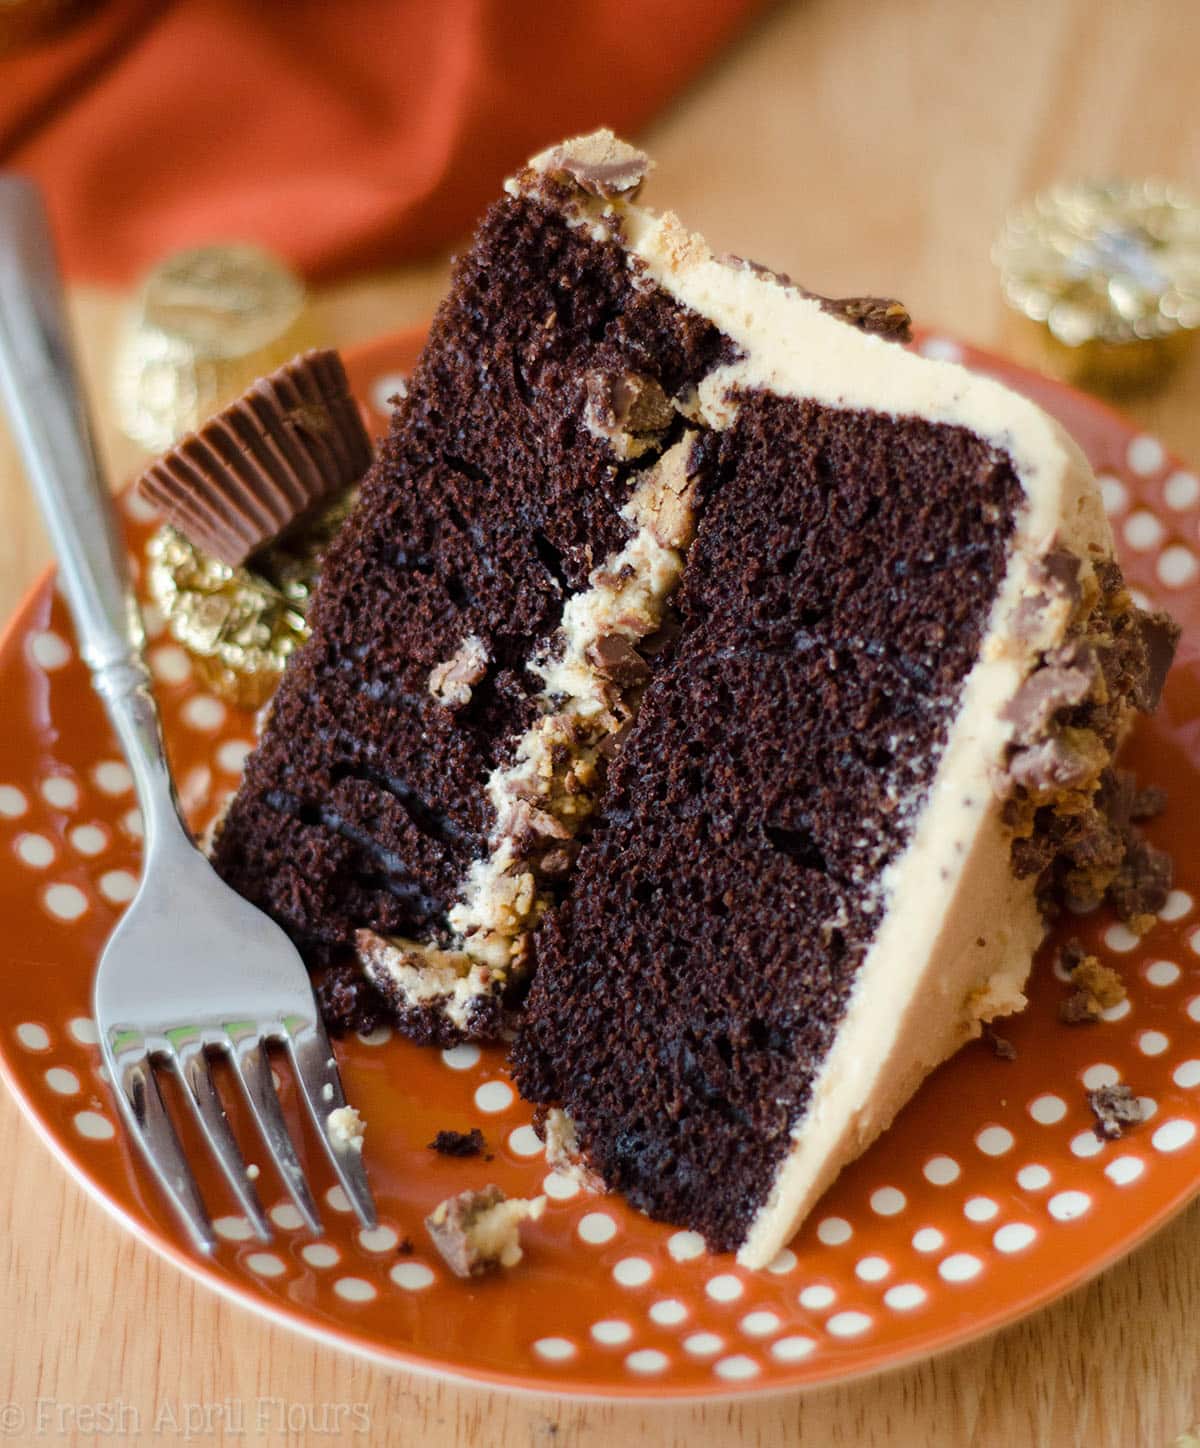 Dark Chocolate Layer Cake with Peanut Butter Frosting: An easy two-layer dark chocolate cake covered in creamy, dreamy peanut butter frosting, all from scratch!